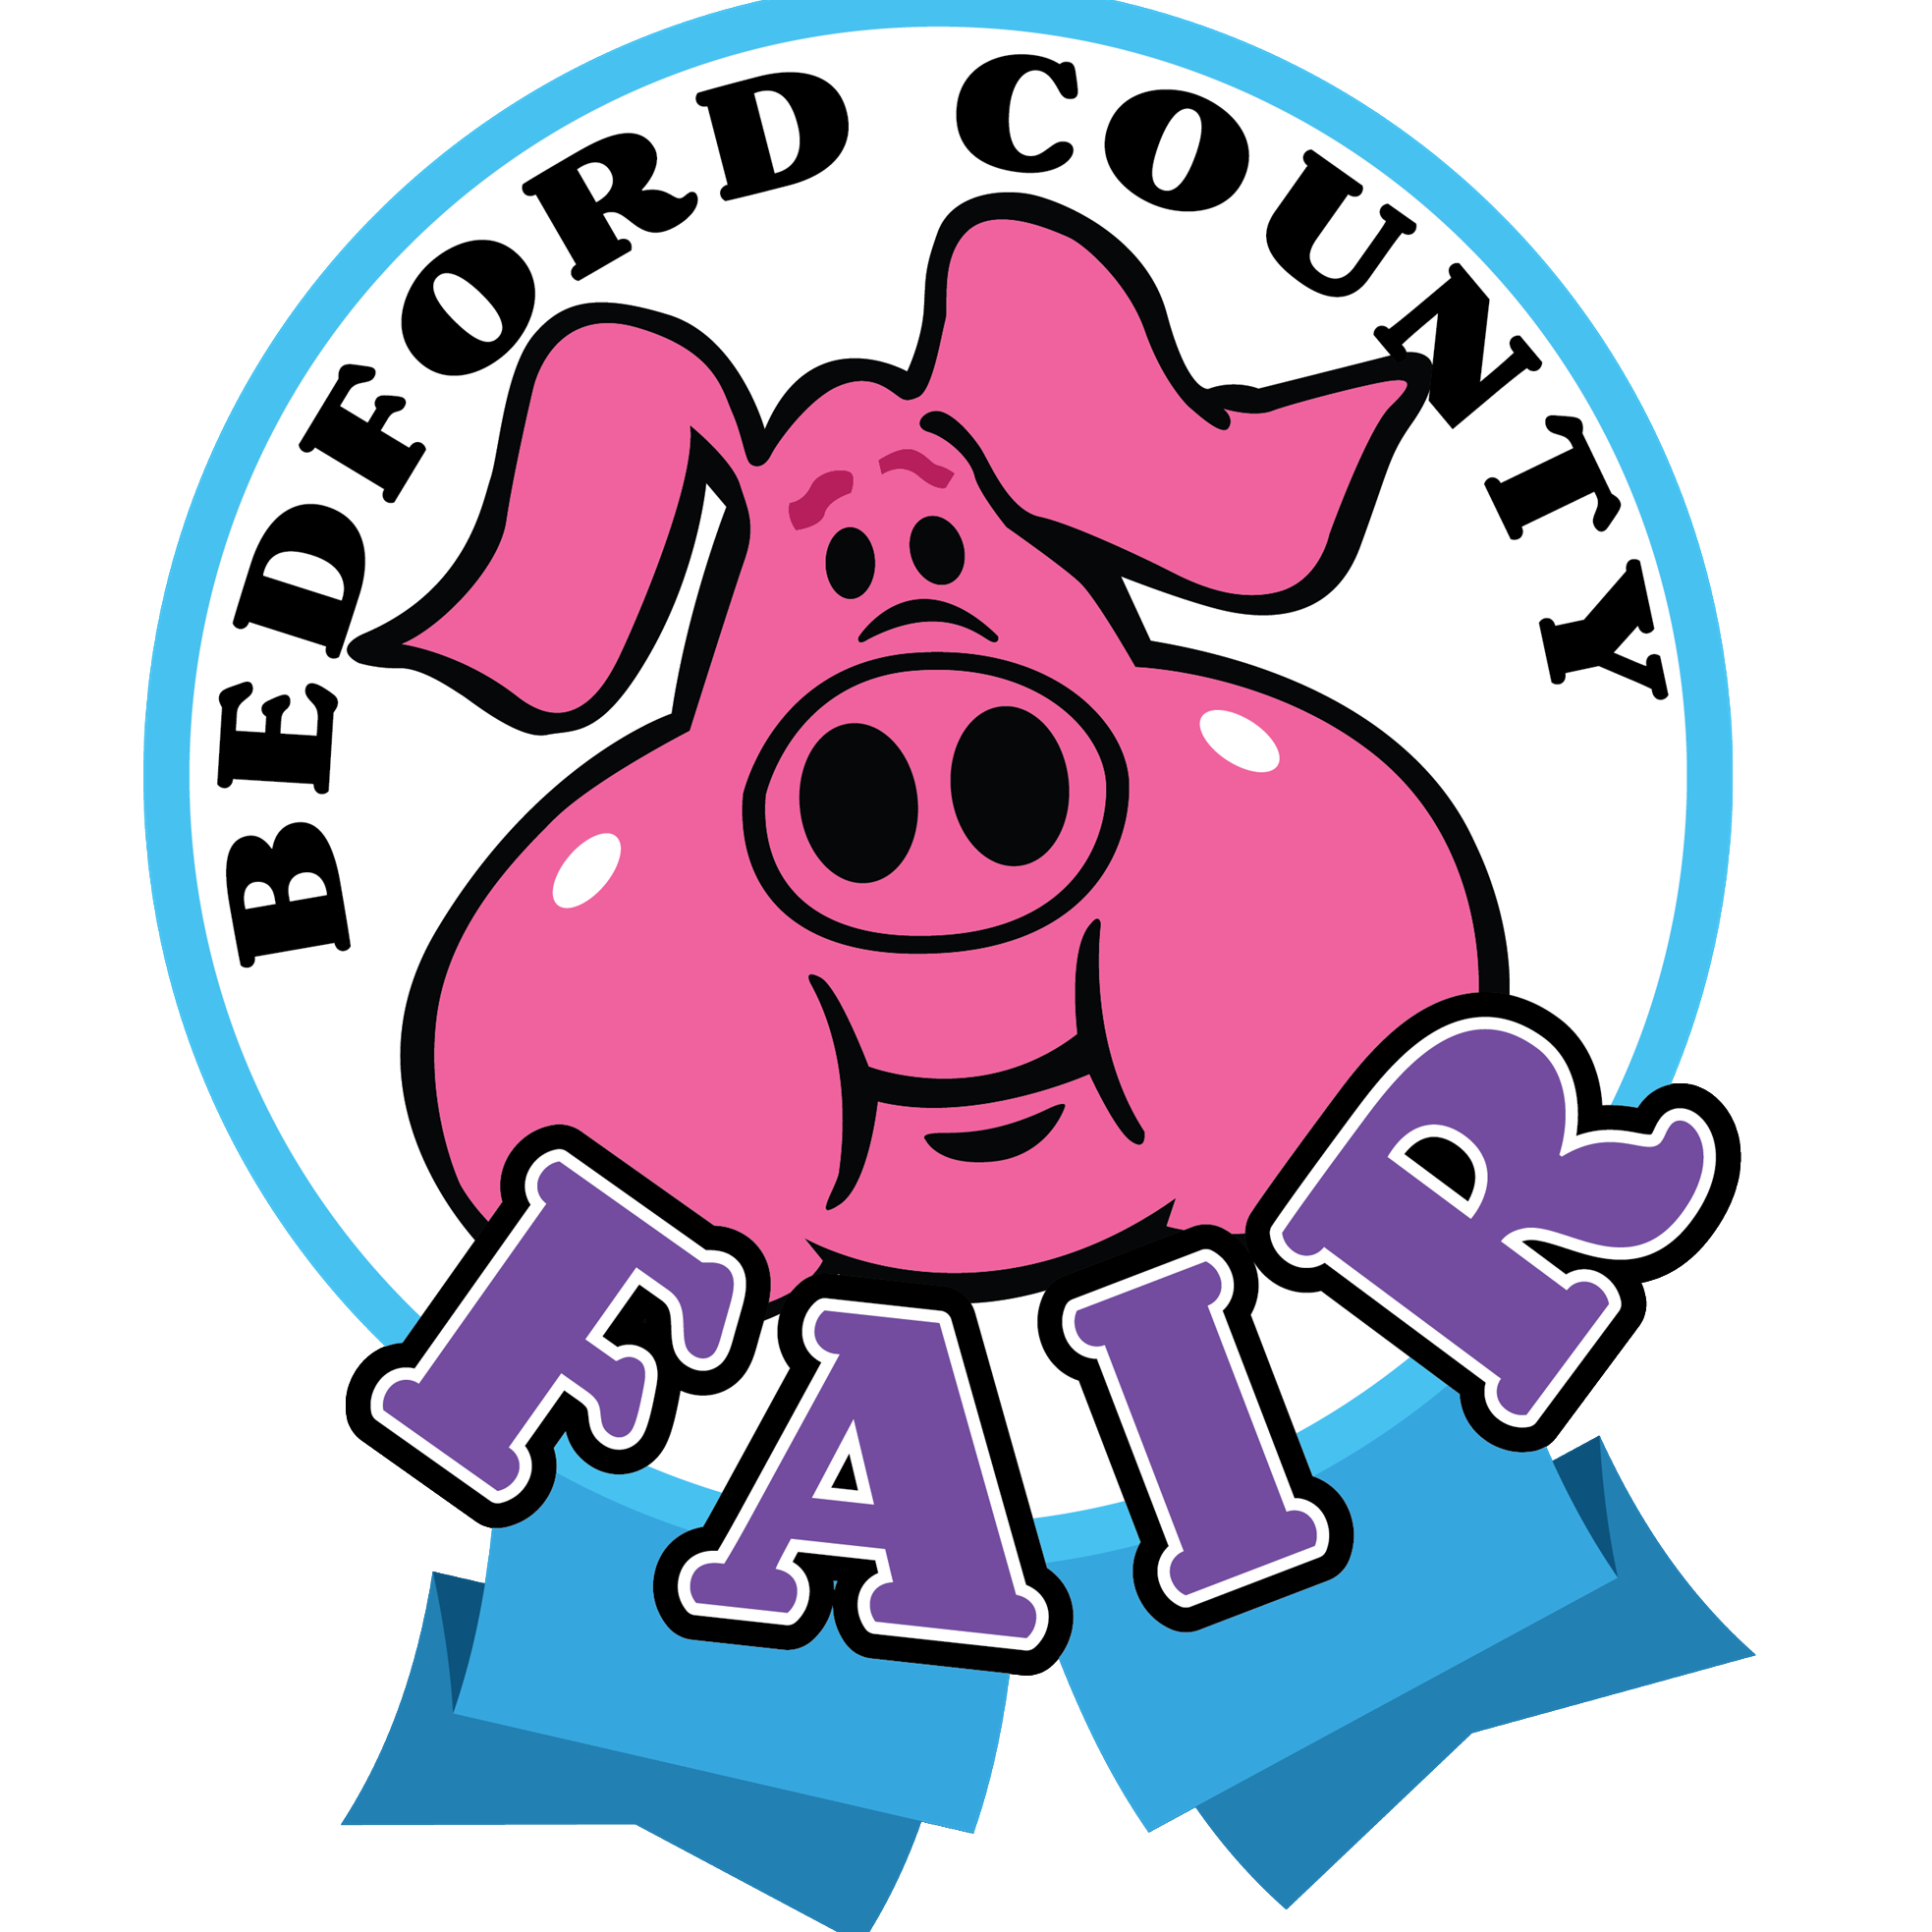 Bedford County Fair PA contact informationinfo